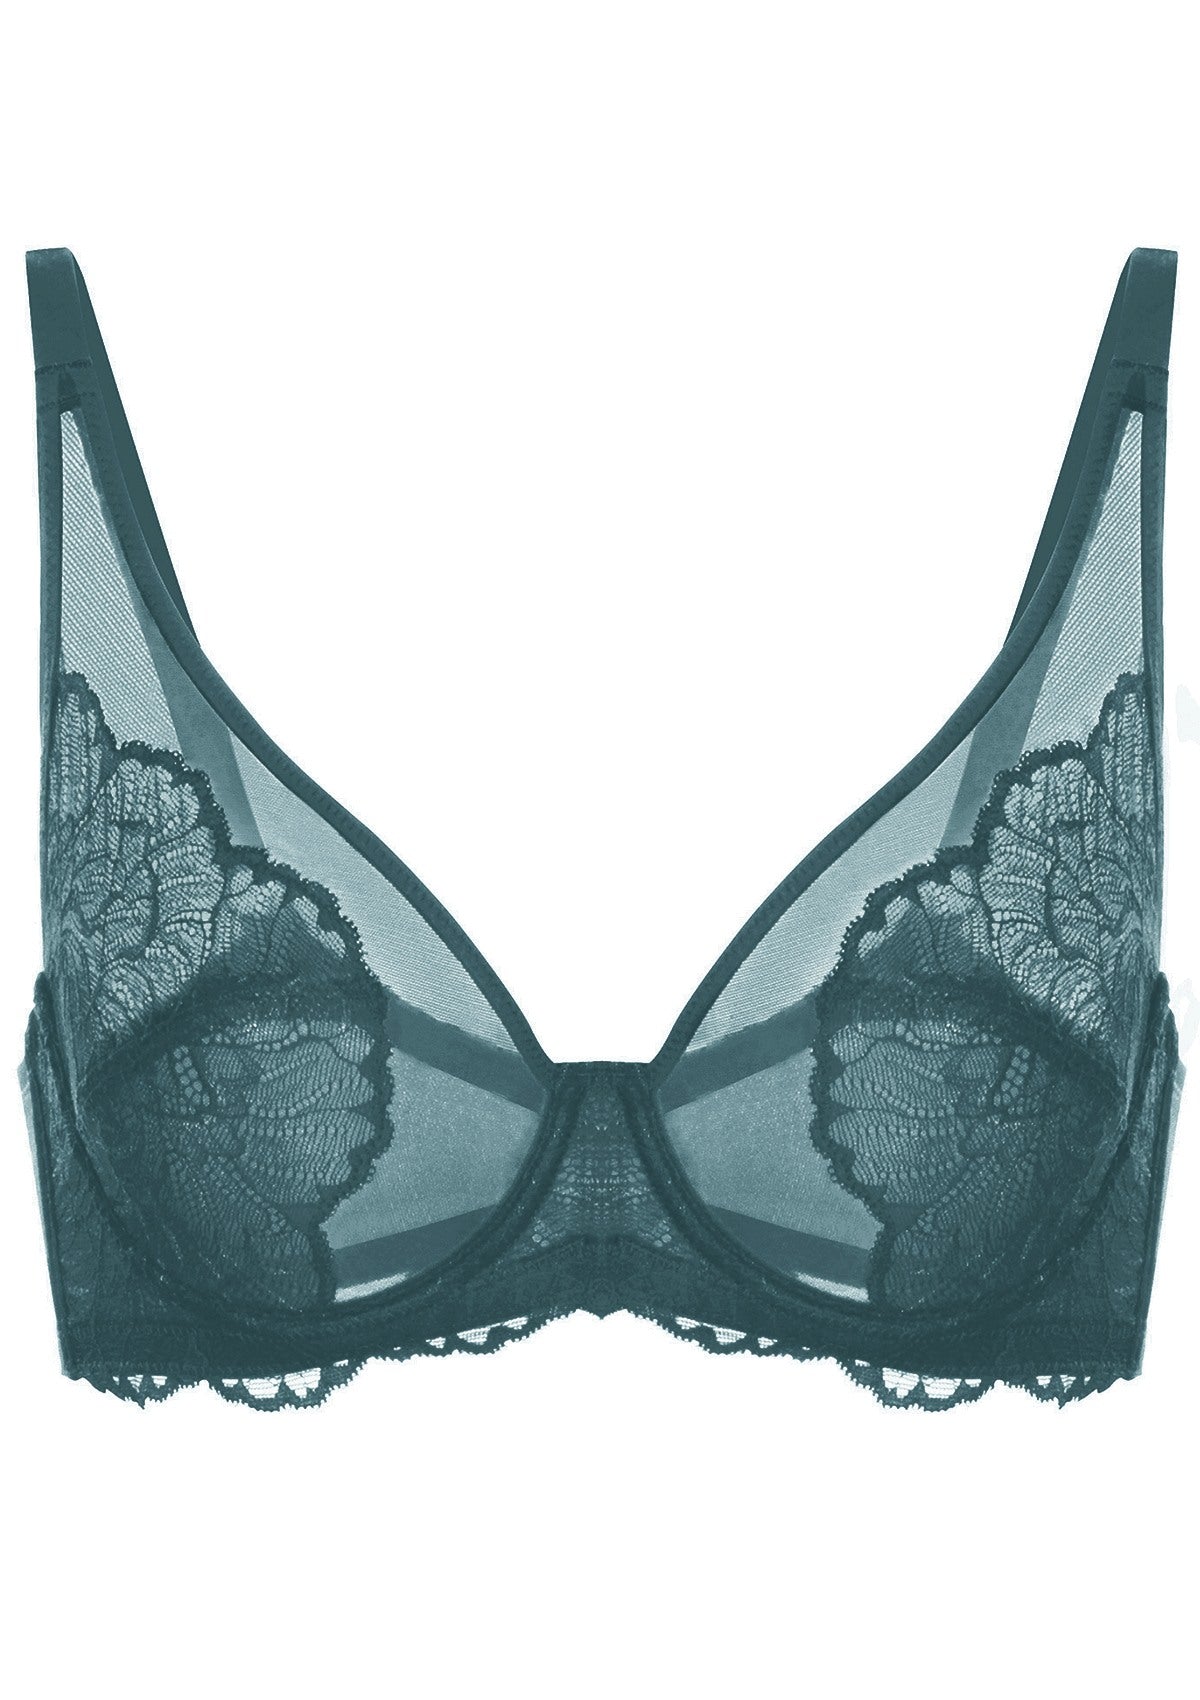 HSIA Blossom Full Figure See-Through Lace Bra For Side And Back Fat - Dark Blue / 34 / C